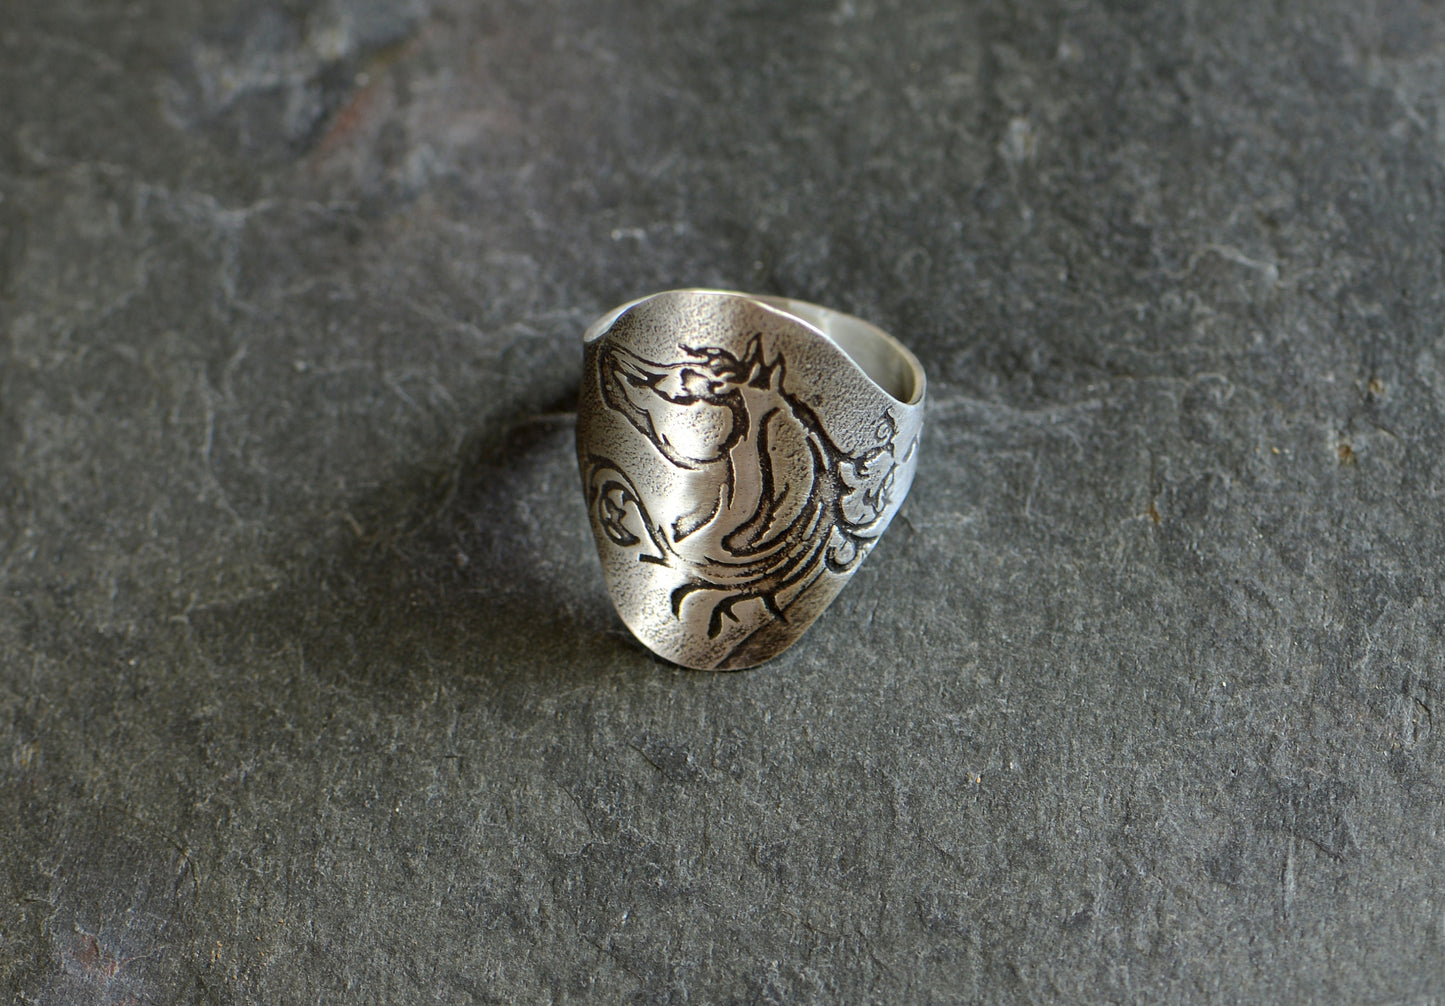 Saddle ring handcrafted in sterling silver with horse design